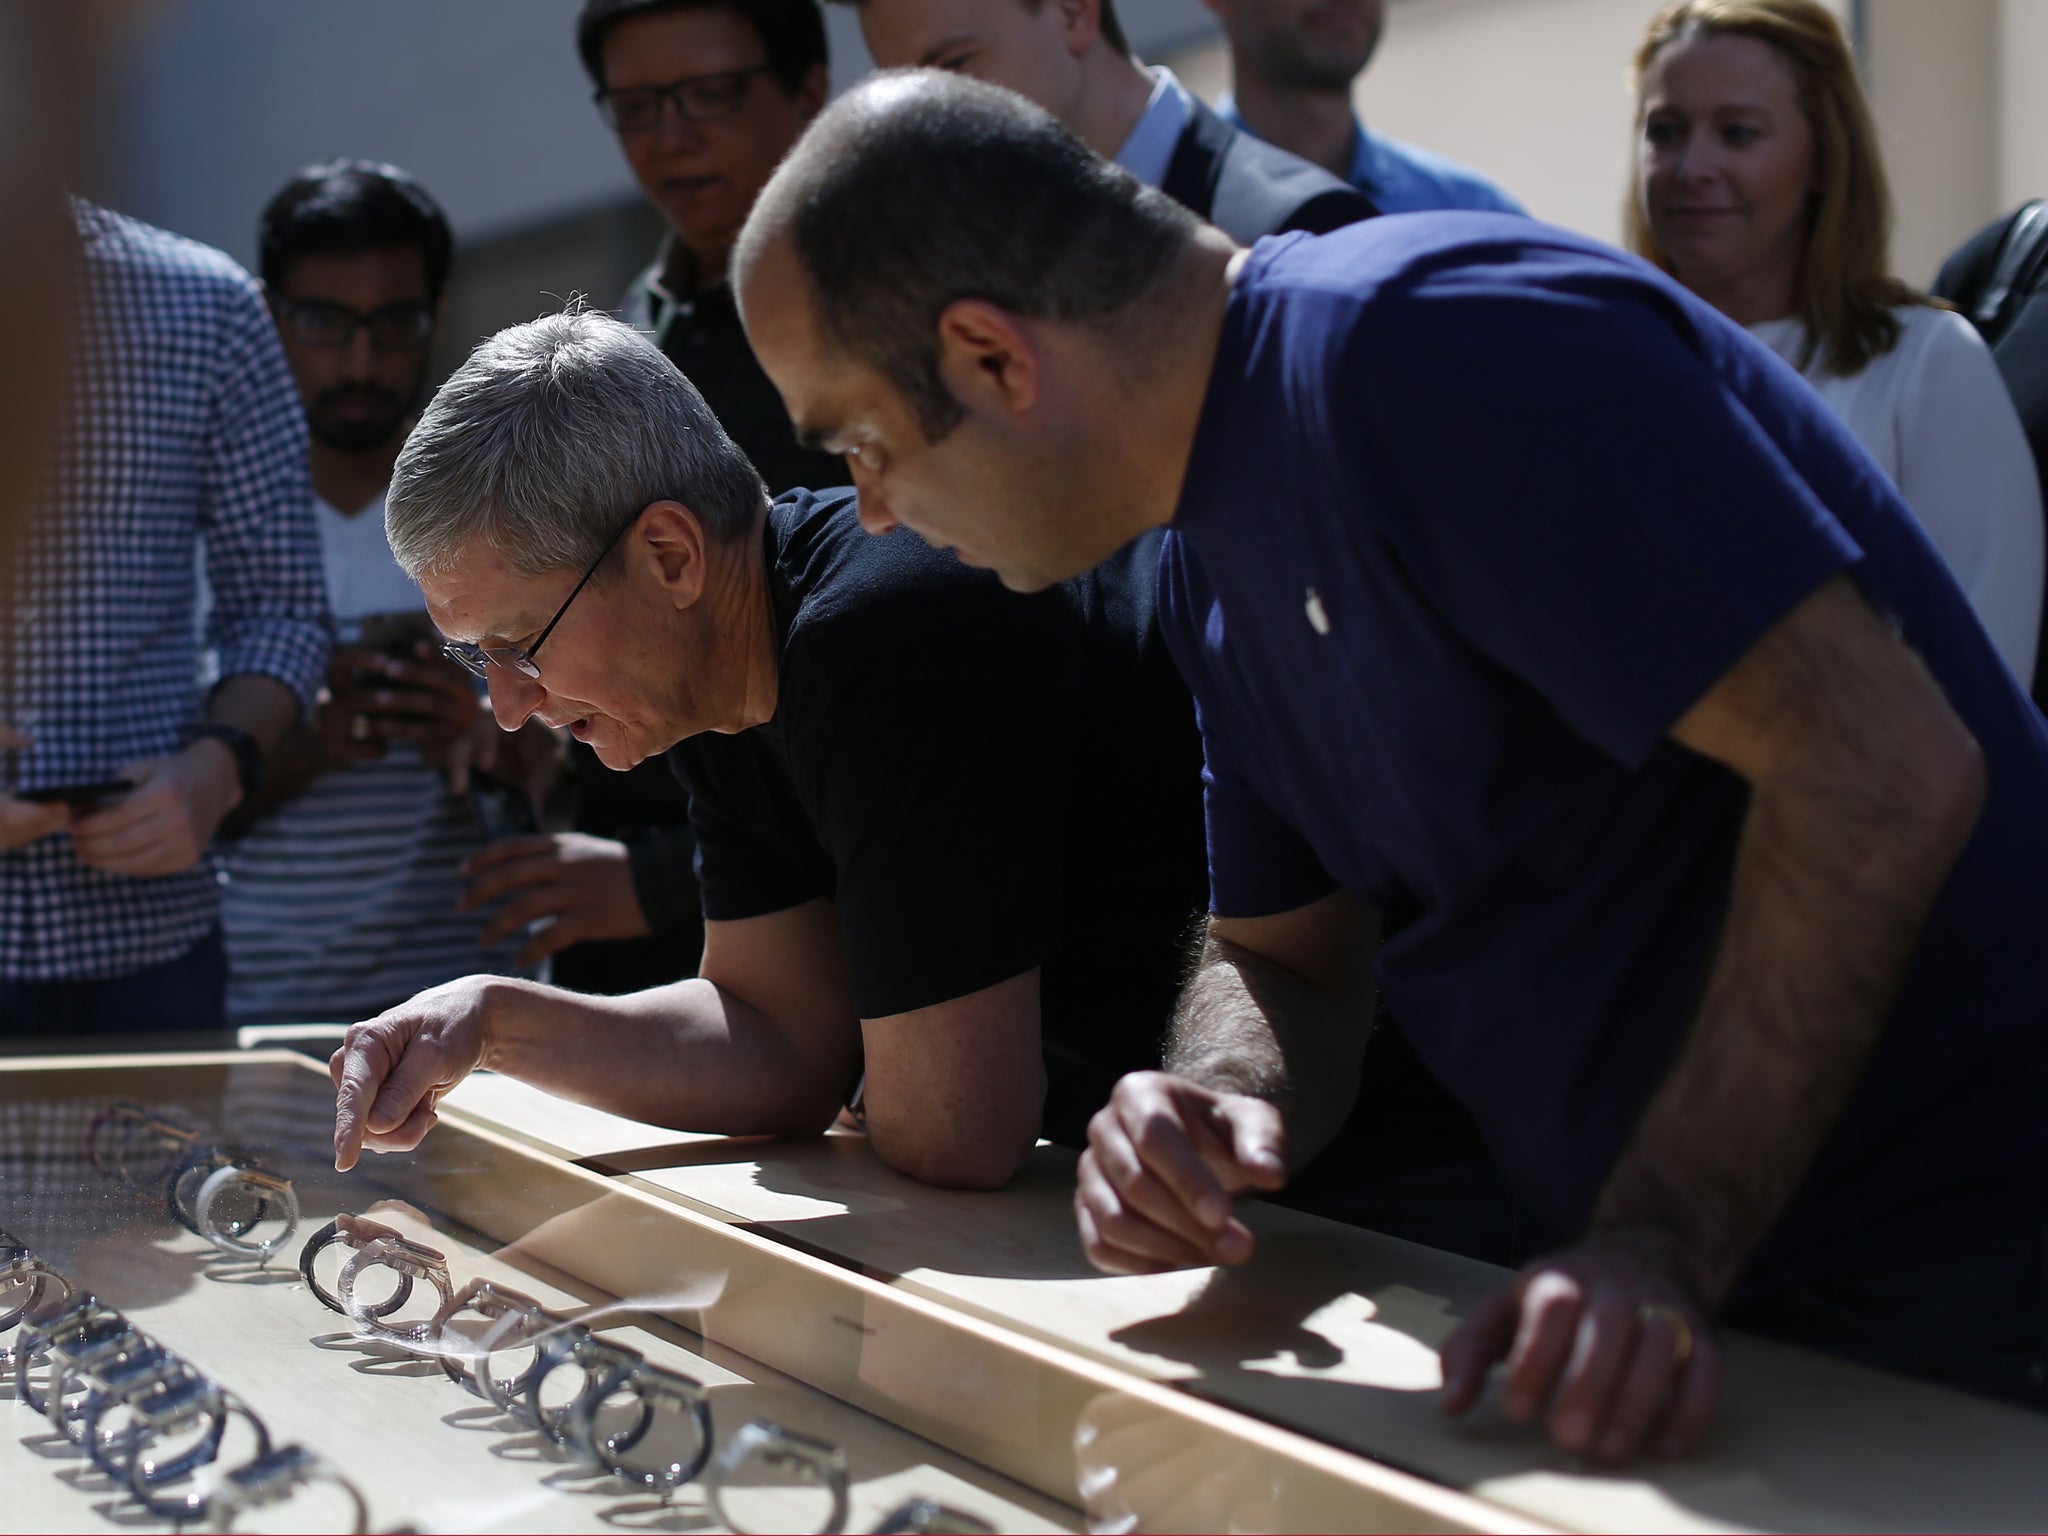 Apple CEO Tim Cook points at an Apple Watch at an Apple Store on April 10, 2015 in Palo Alto, California. The pre-orders of the highly-anticipated wearable from the tech giant begin today as the watches arrive at stores for customers to preview.